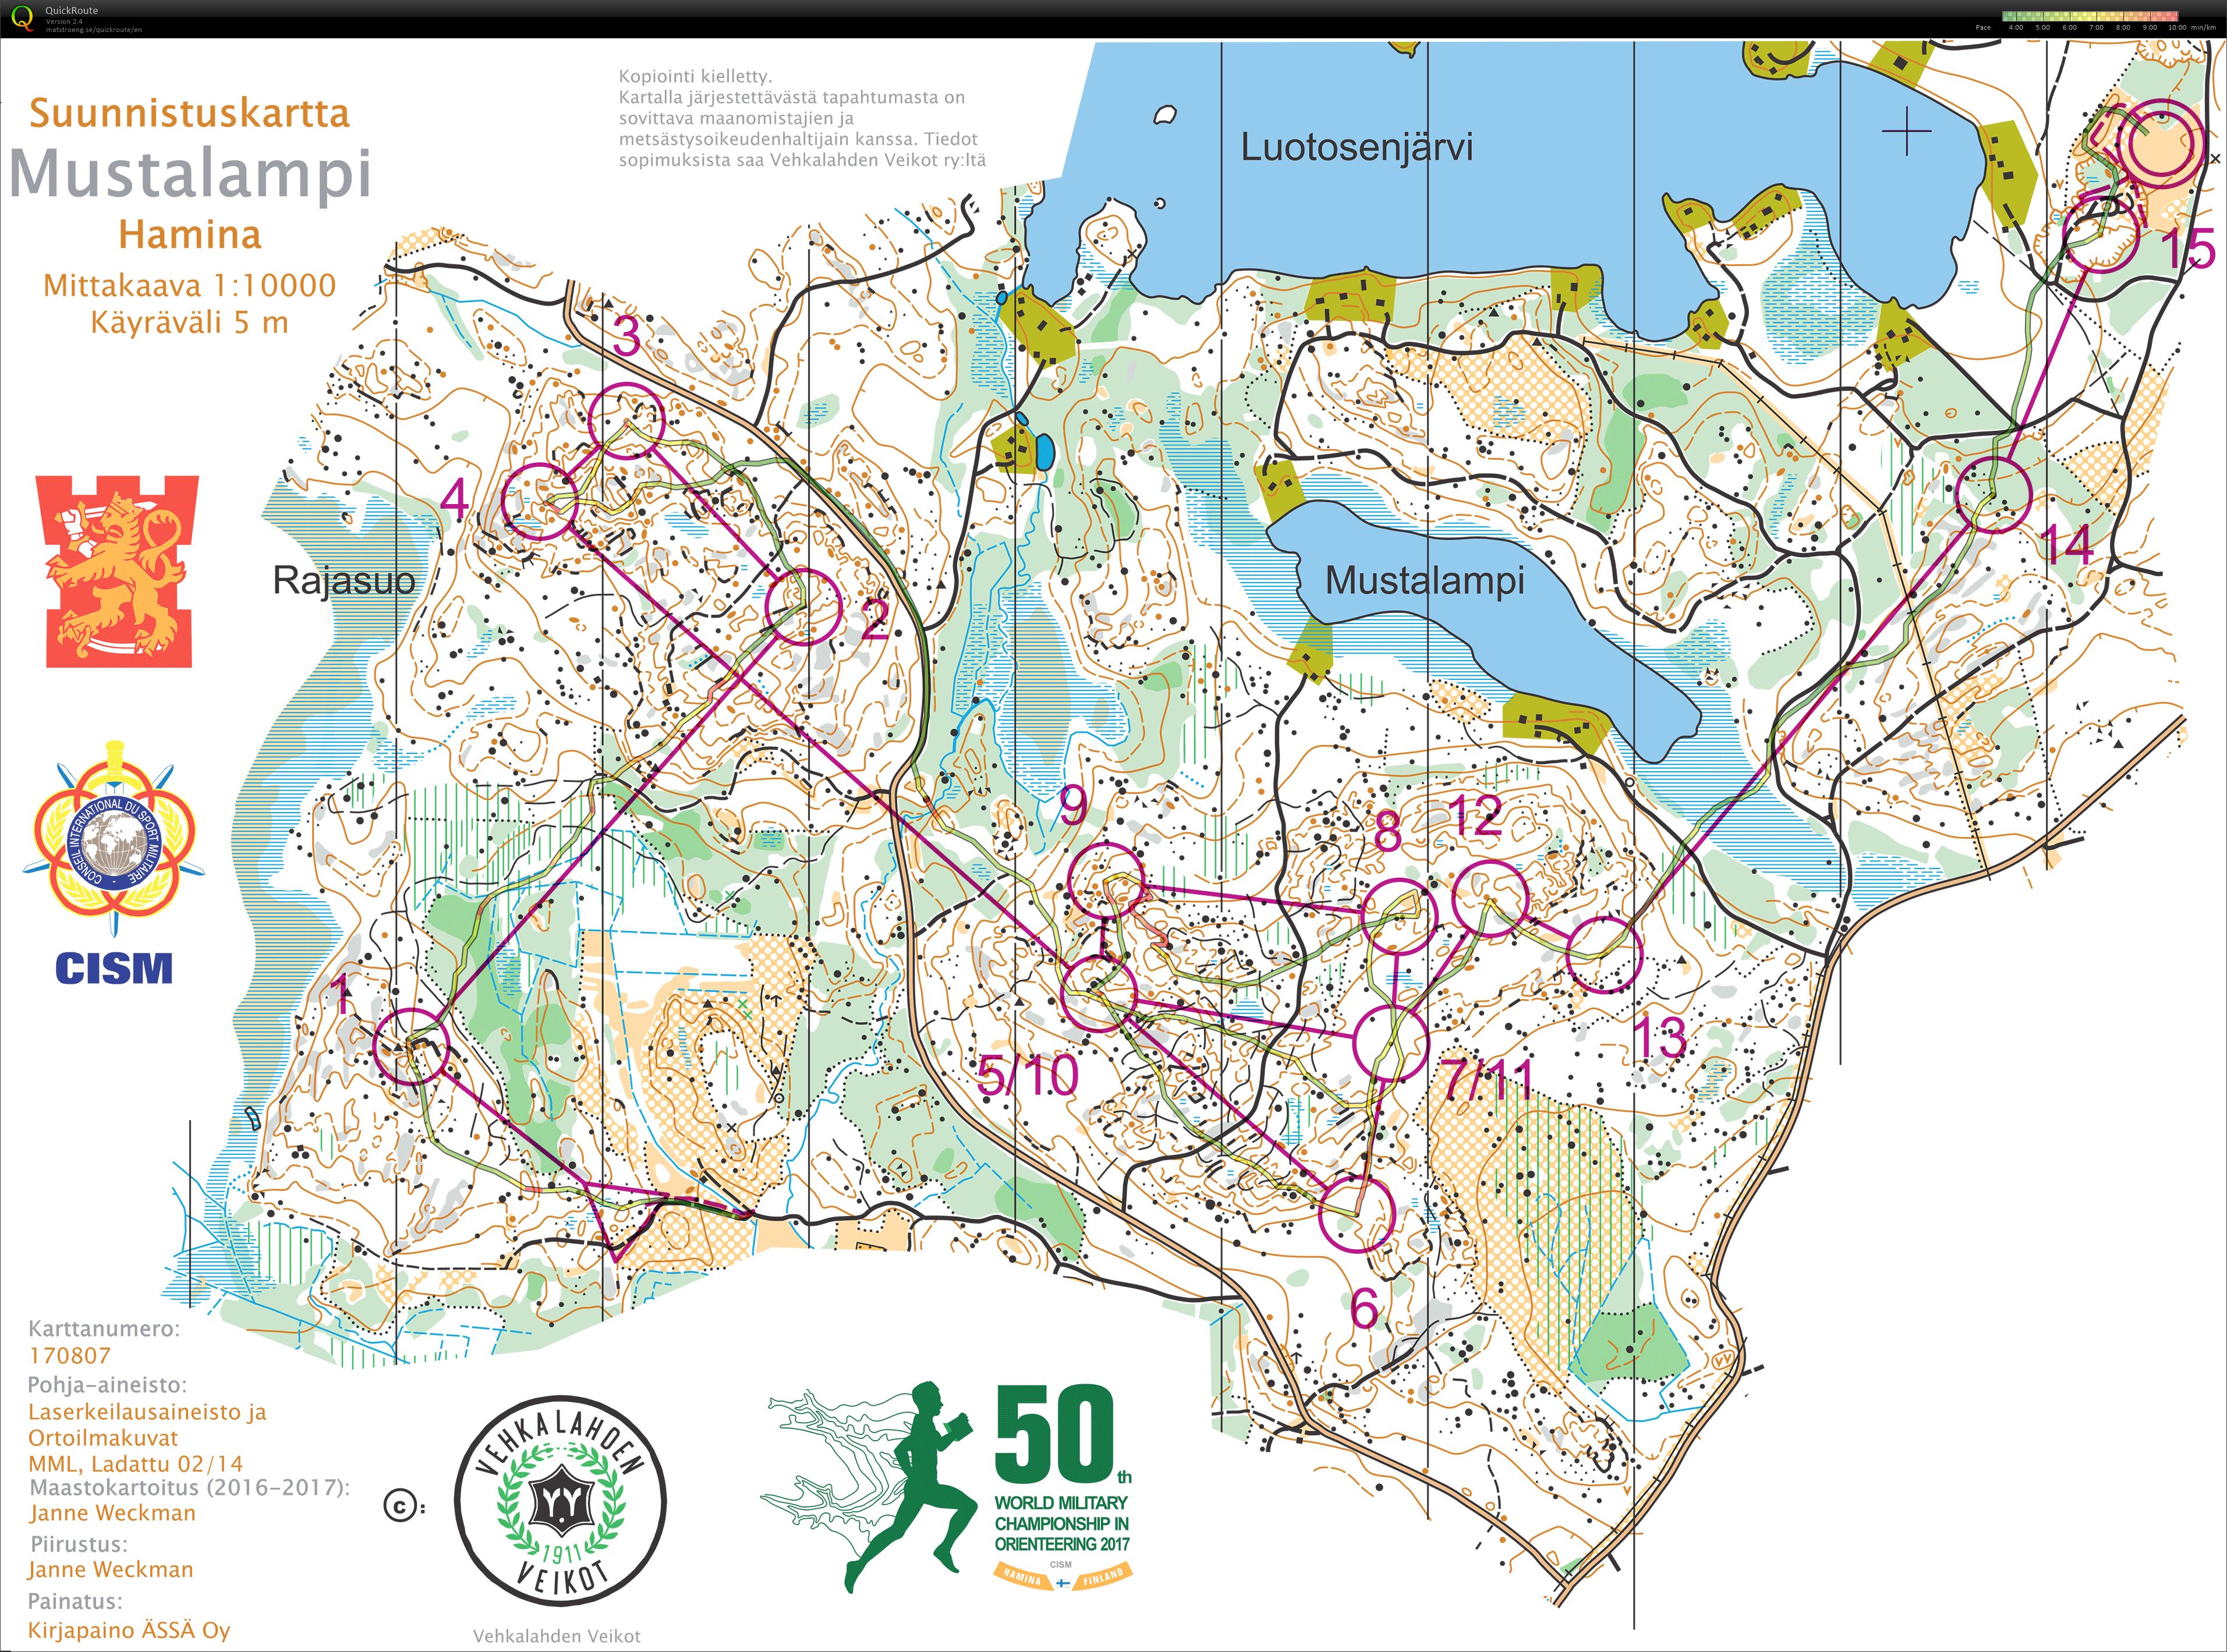 CISM World Military Orienteering Championships | Middle (2017-06-12)